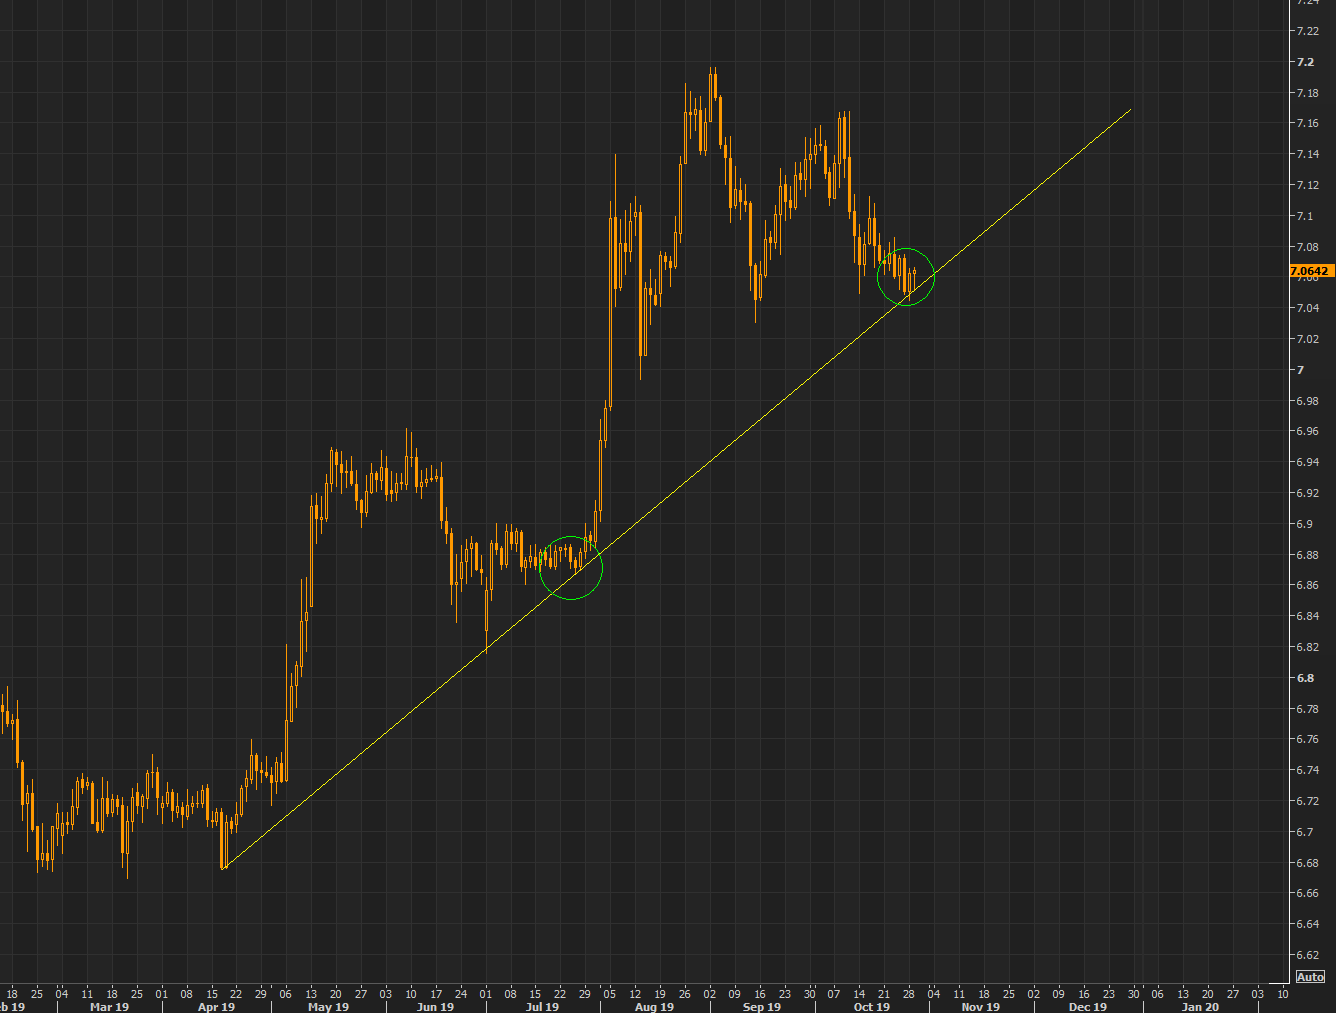 Yuan reversing some of the earlier gains, now flat on the day after "bouncing" right on the trend channel 